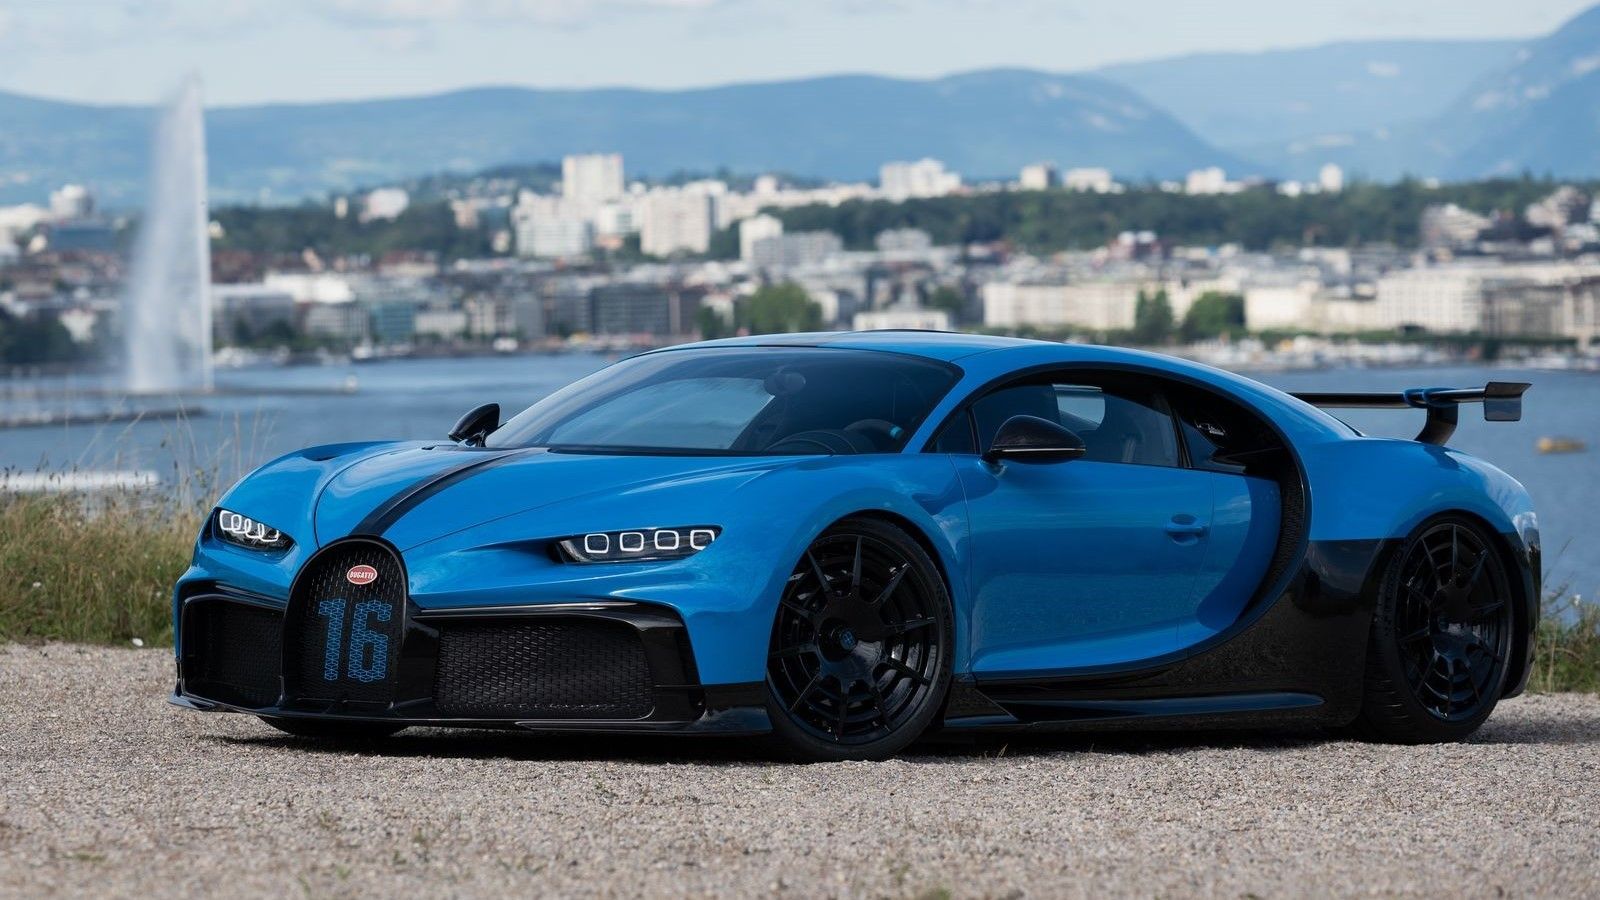 Better late than never: The Bugatti Chiron Pur Sport arrived in Geneva